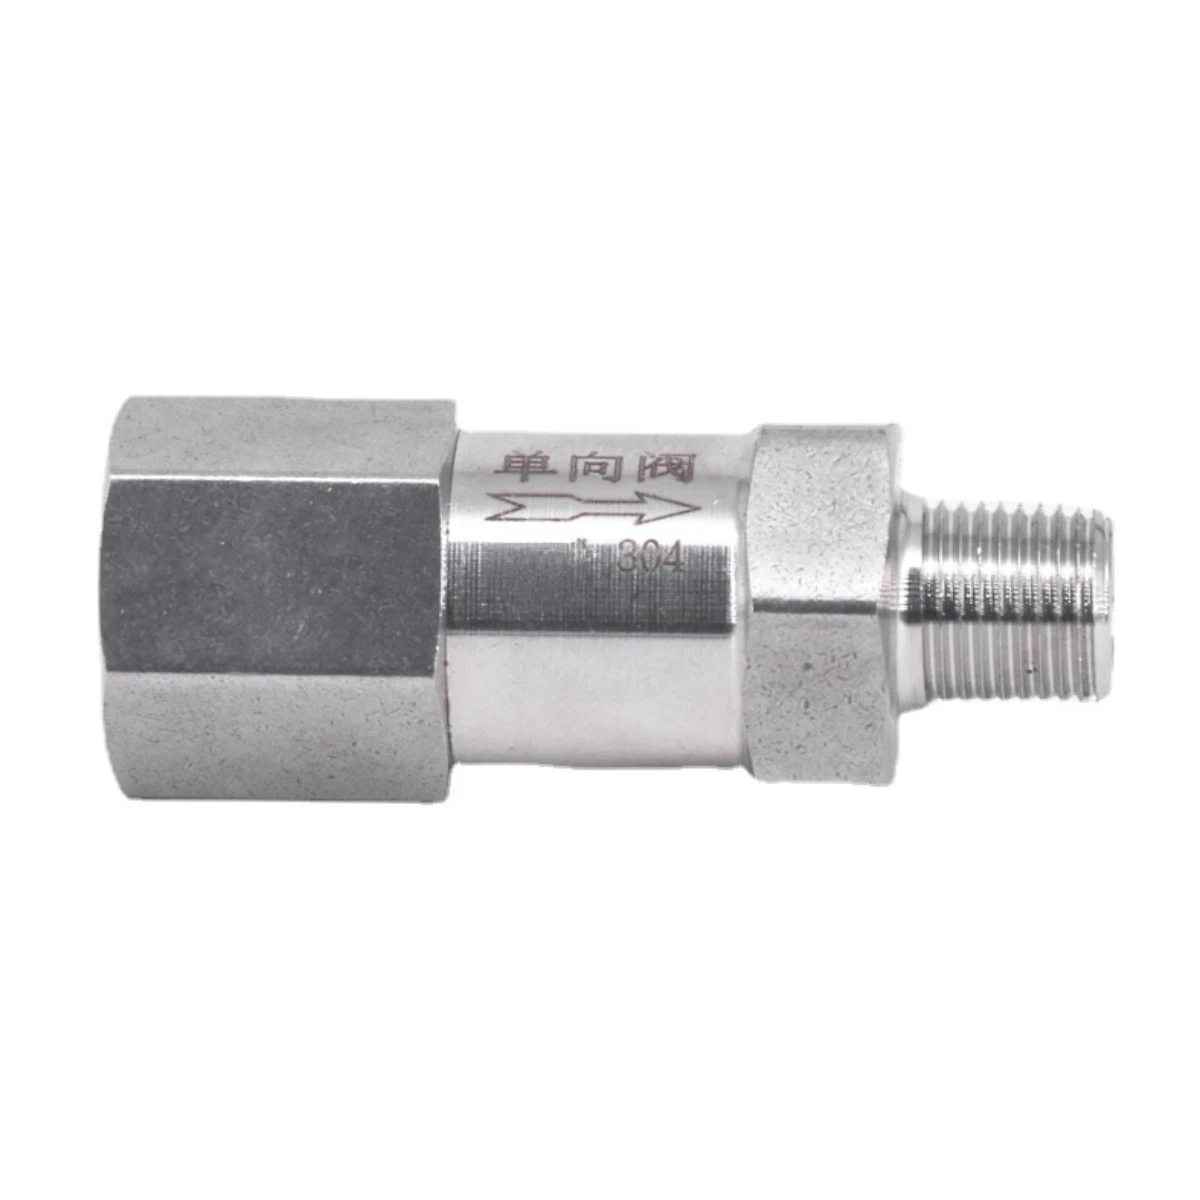 1/2 BSP Female To 1/2 BSP Male Thread Brass Check Valve One Way Non-return Valve With Cap Nut For Water